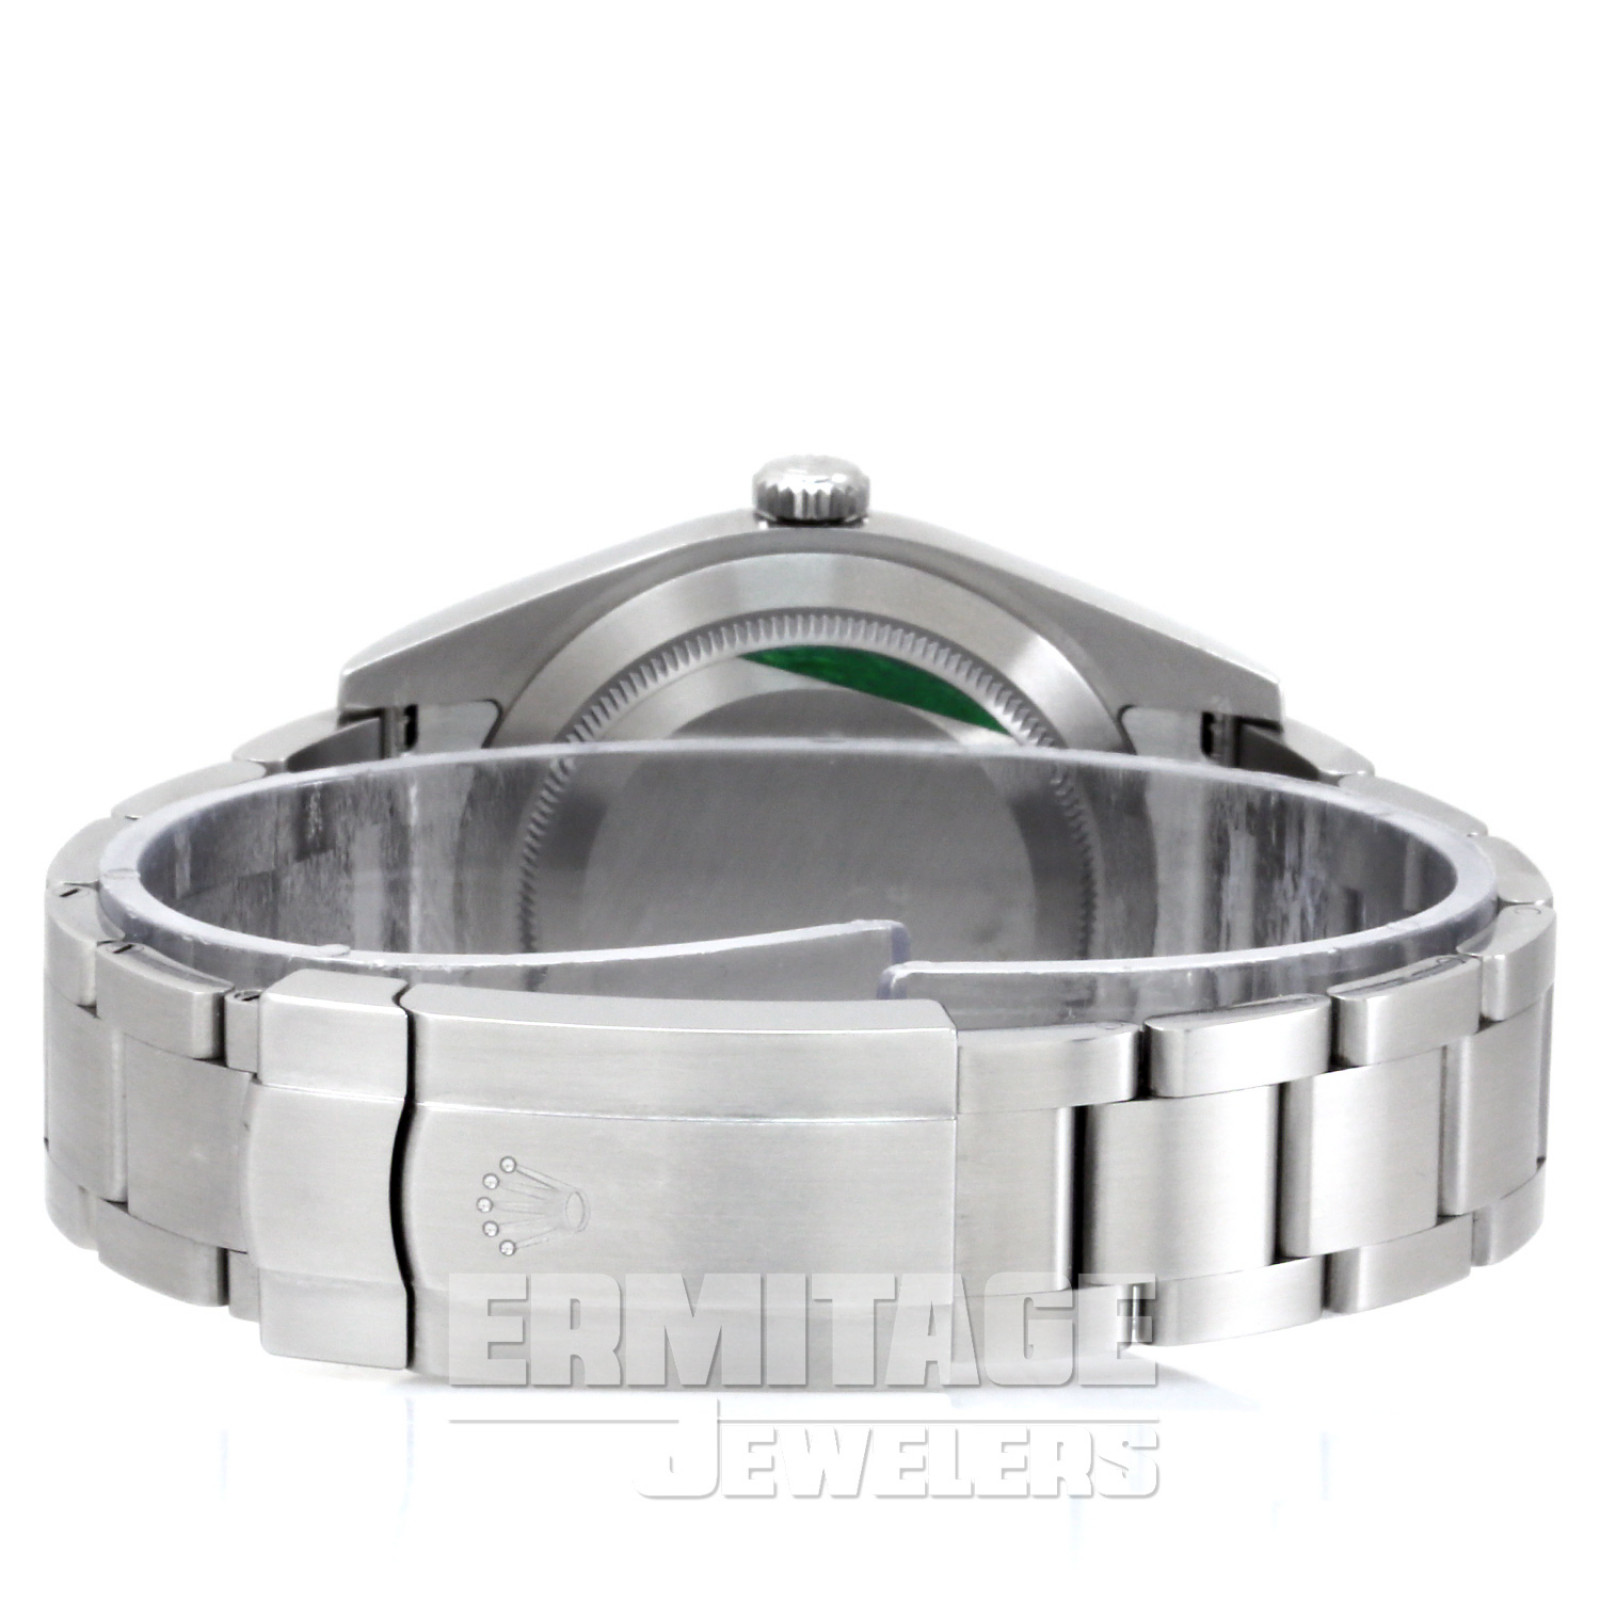 39 mm Rolex Oyster Perpetual 114300 Steel on Oyster with Rhodium Dial